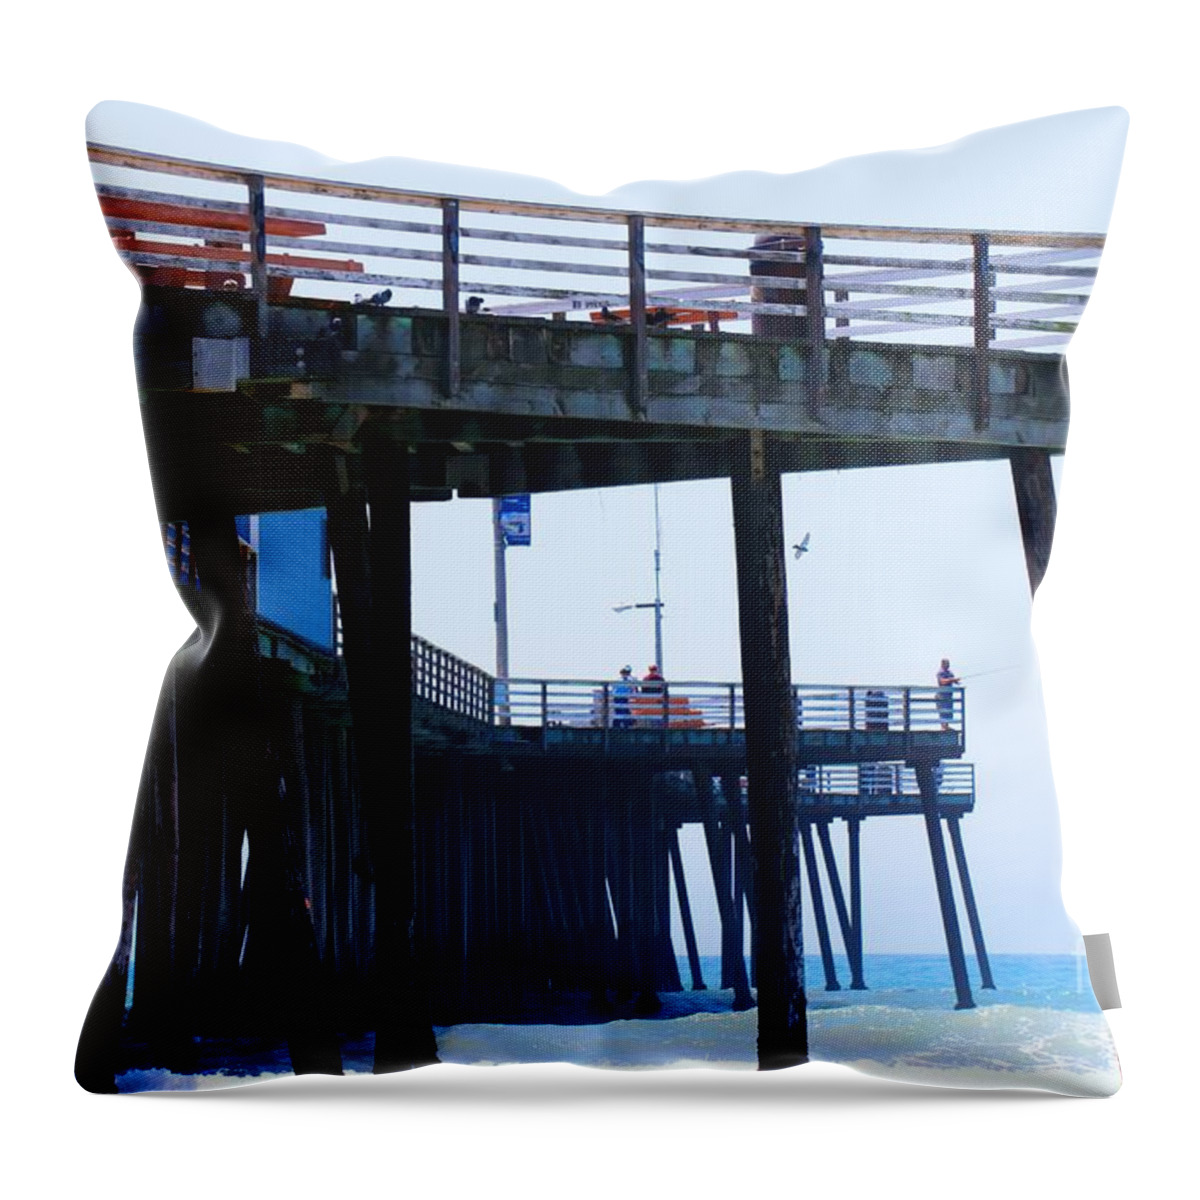 Pismo Throw Pillow featuring the photograph Pismo Beach Pier by Tap On Photo